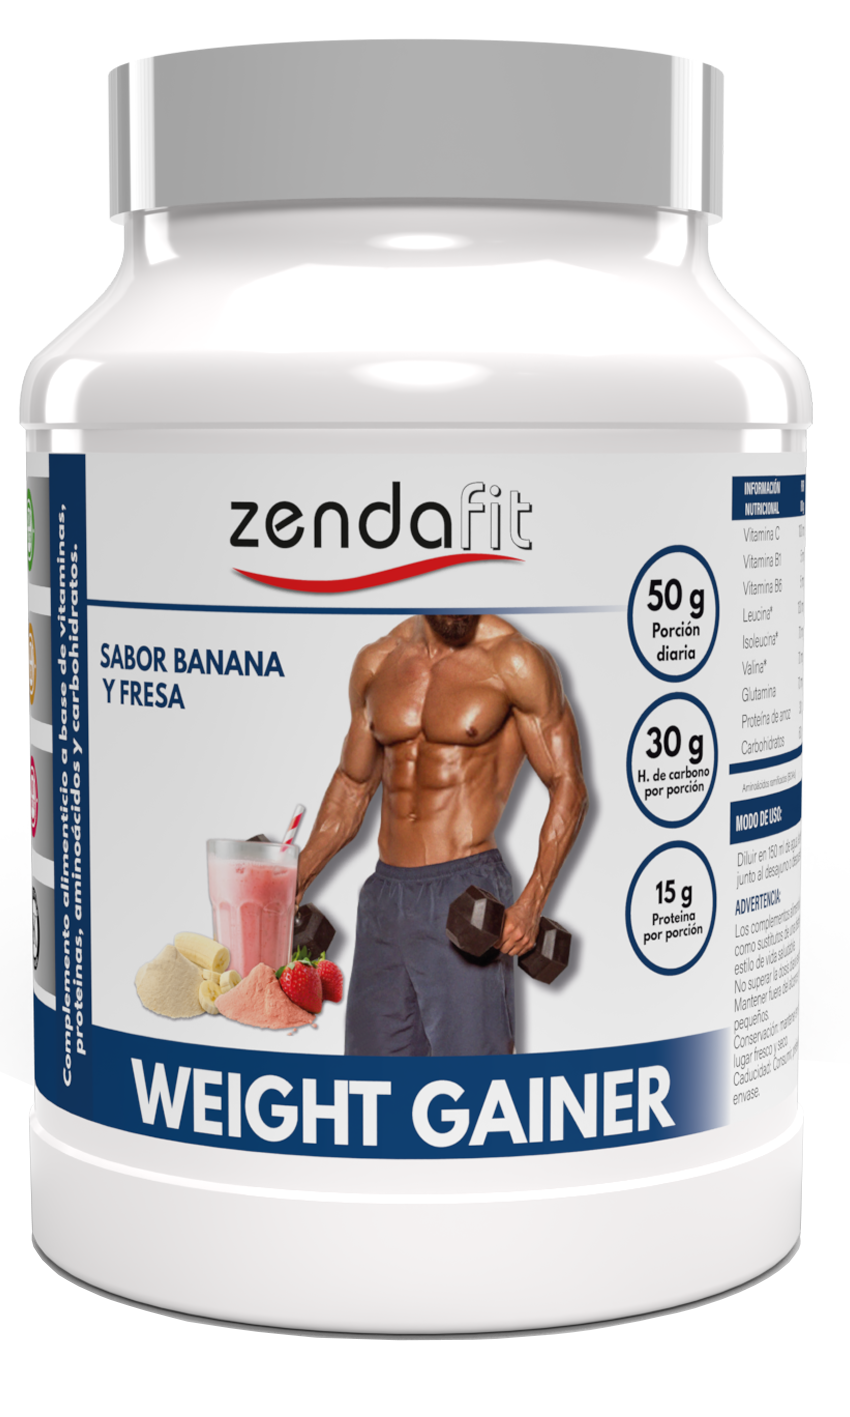 Weight Gainer (Ganador de Peso) Banana and Strawberry Flavor - 1800 grams (15g of proteins and 30g of carbohydrates per serving)